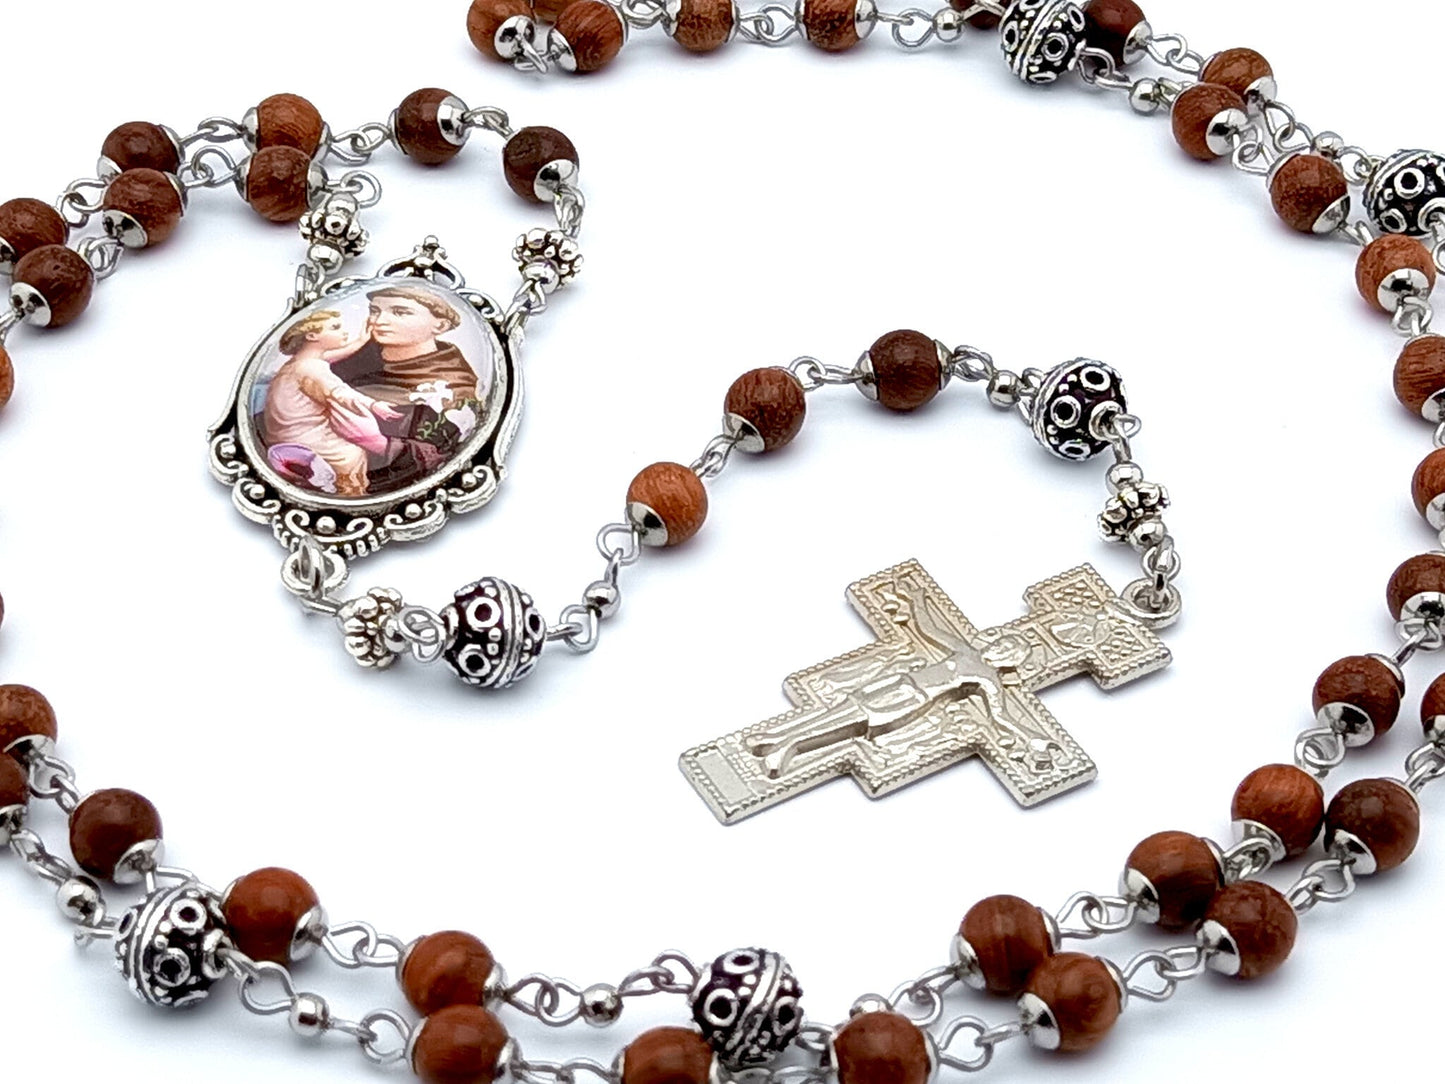 Saint Anthony of Padua unique rosary beads with natural wooden and silver beads, Saint Francis crucifix and picture centre medal.